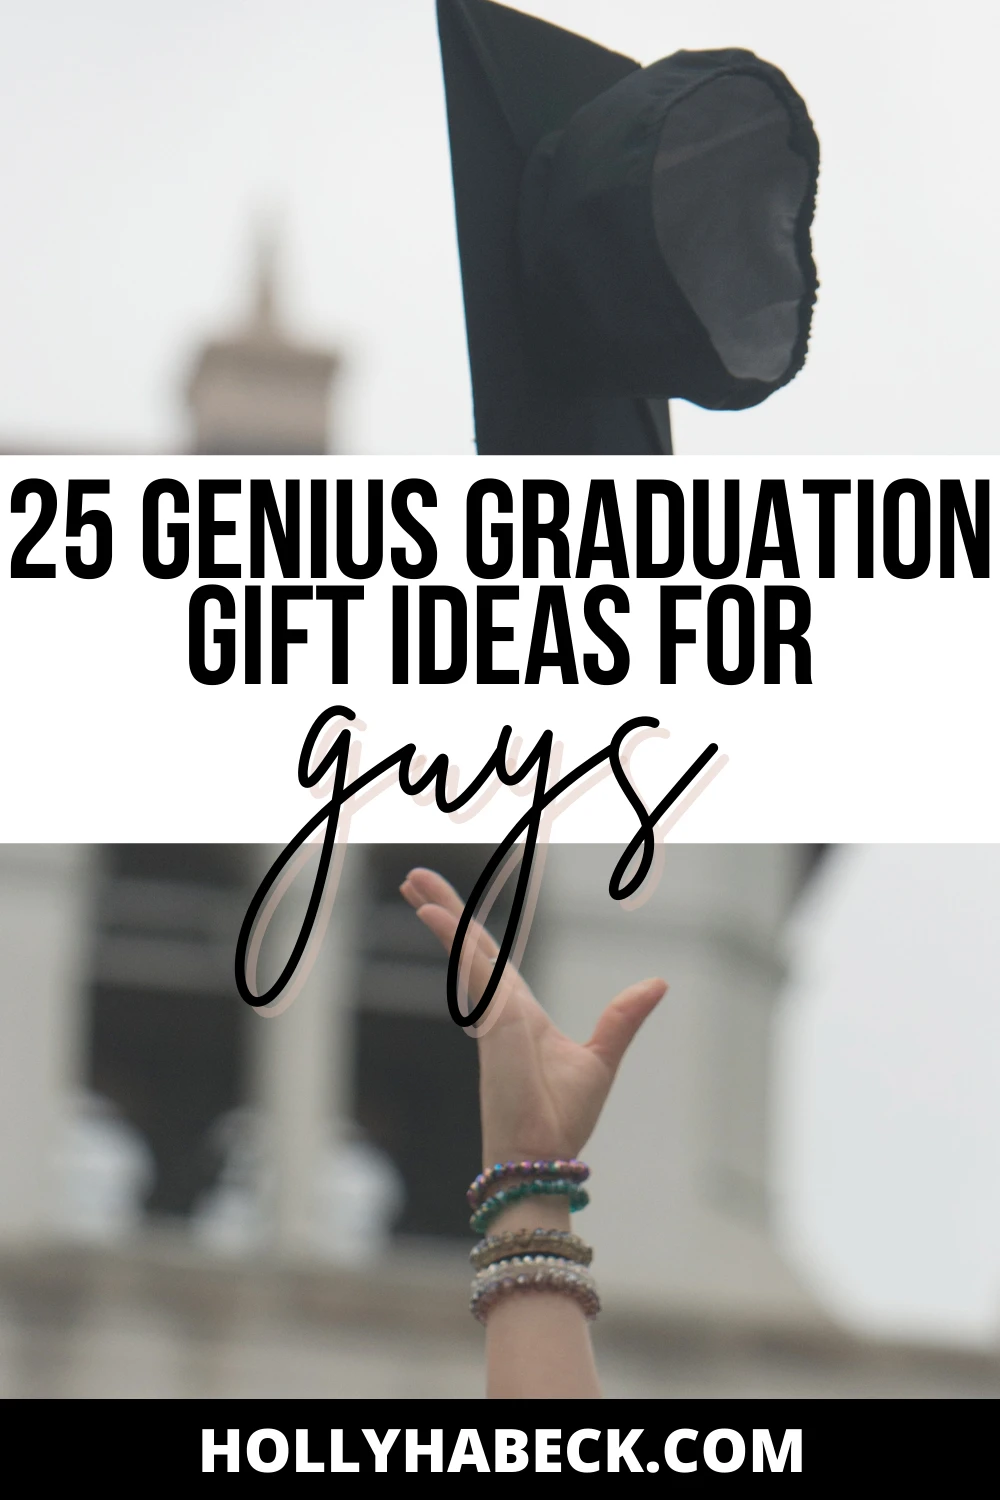 25 Genius Graduation Gift Ideas for Guys and Graduation Gifts for Him